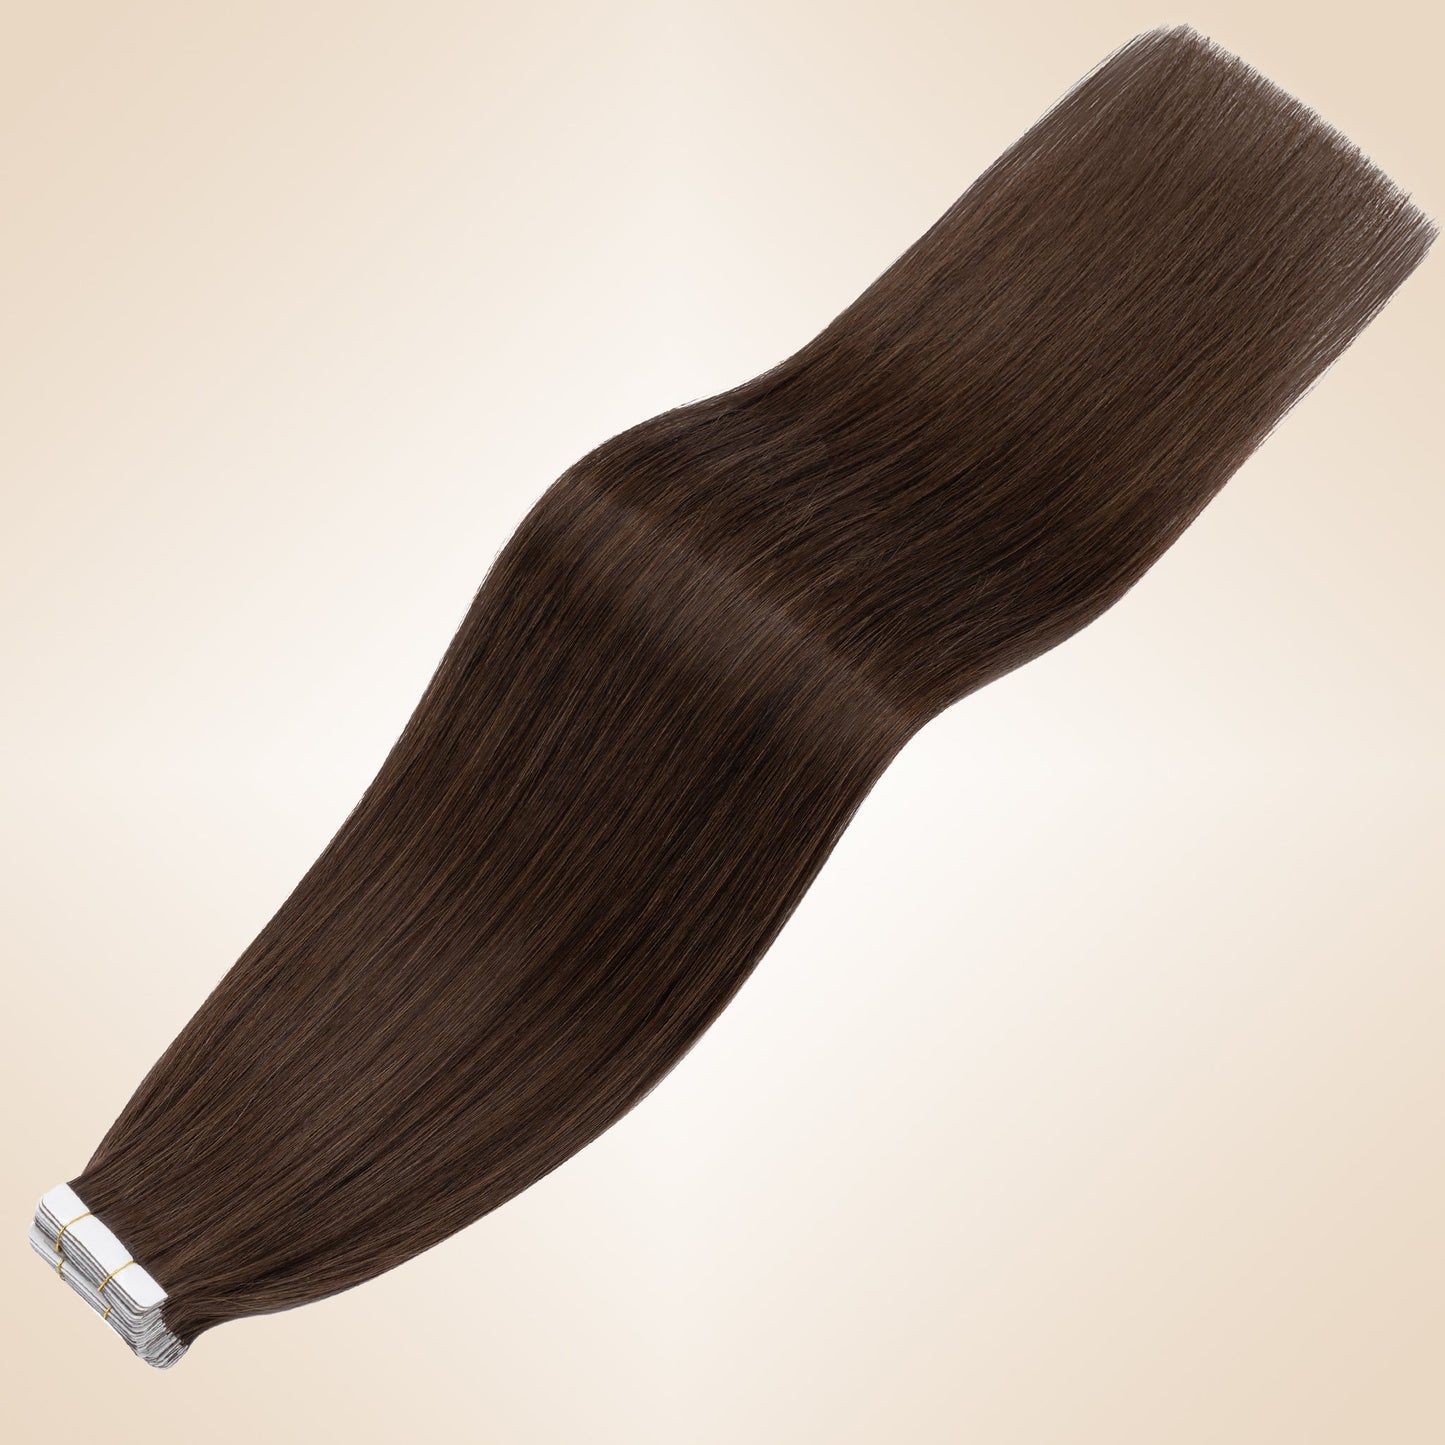 Lightweight Medium Brown Tape In Hair Extensions Invisible Weft 20 PCS segohair.com